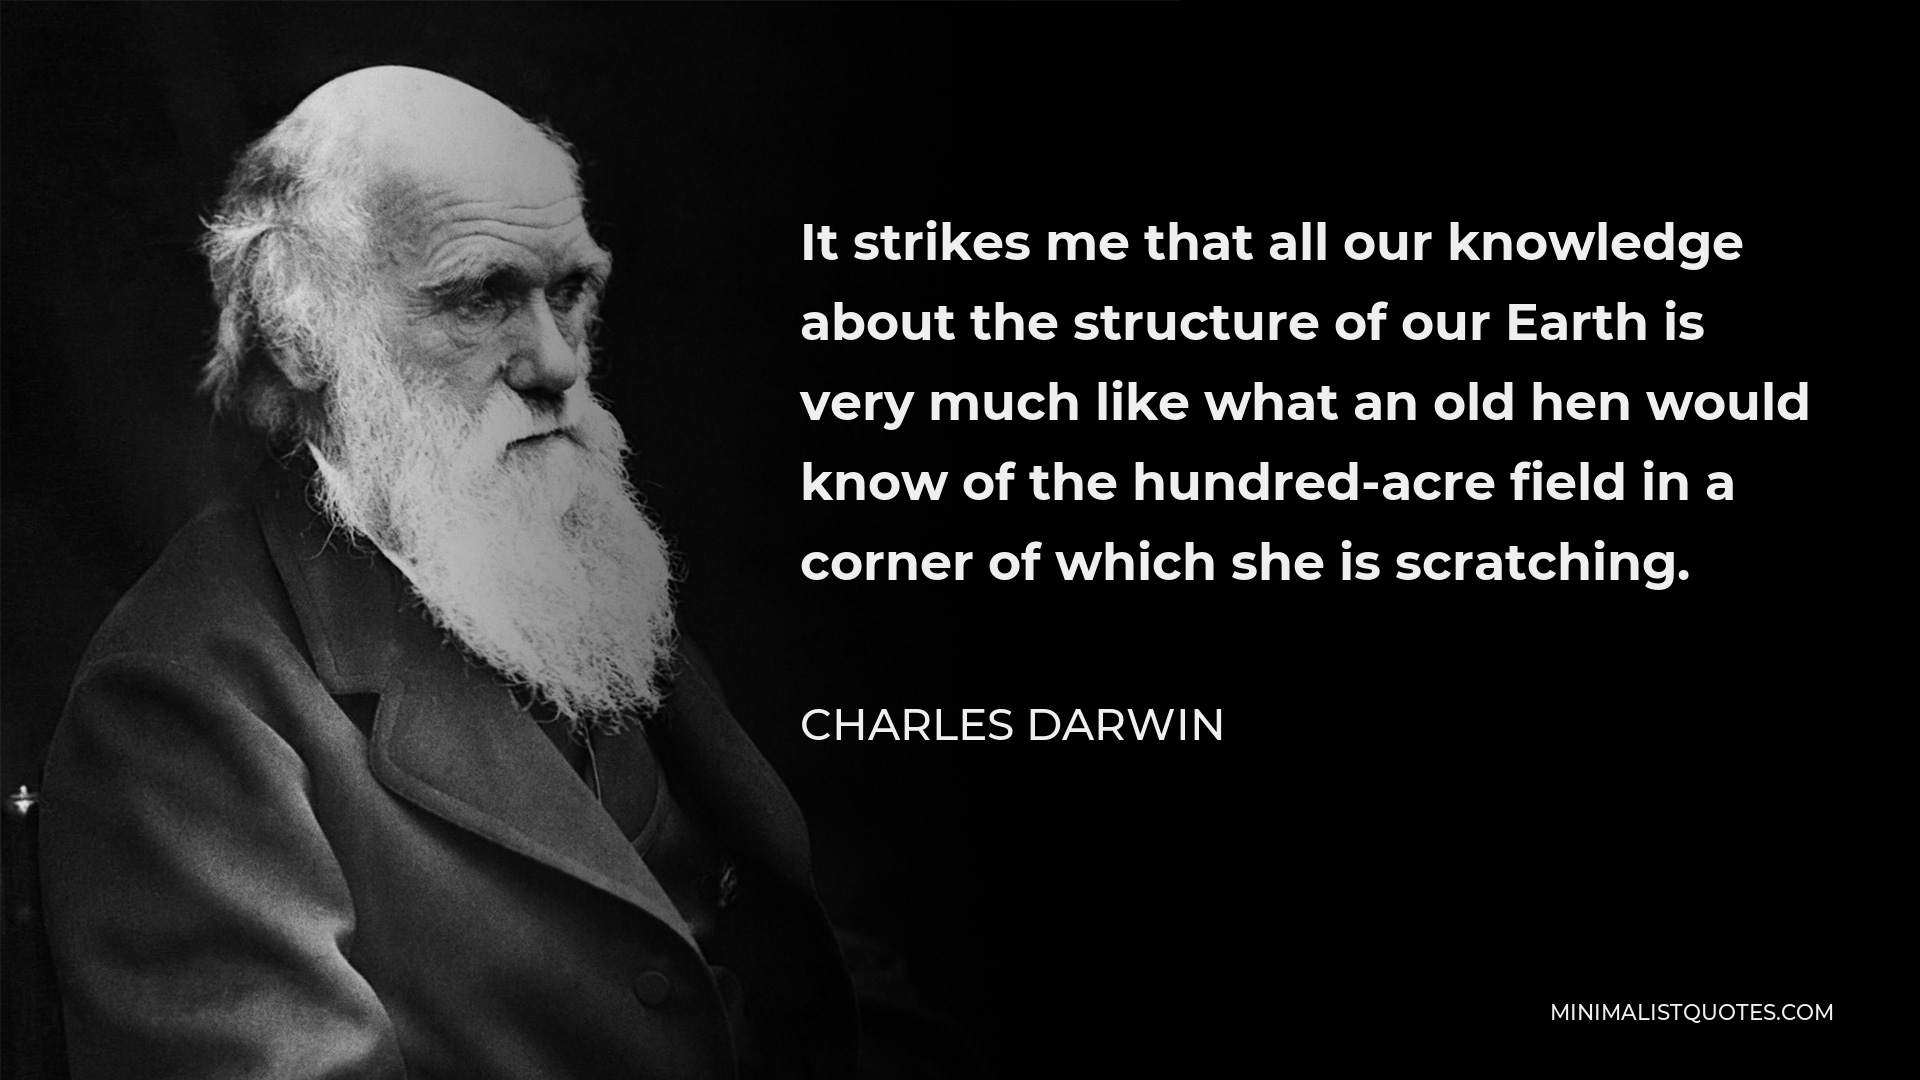 Charles Darwin Quote - It strikes me that all our knowledge about the structure of our Earth is very much like what an old hen would know of the hundred-acre field in a corner of which she is scratching.